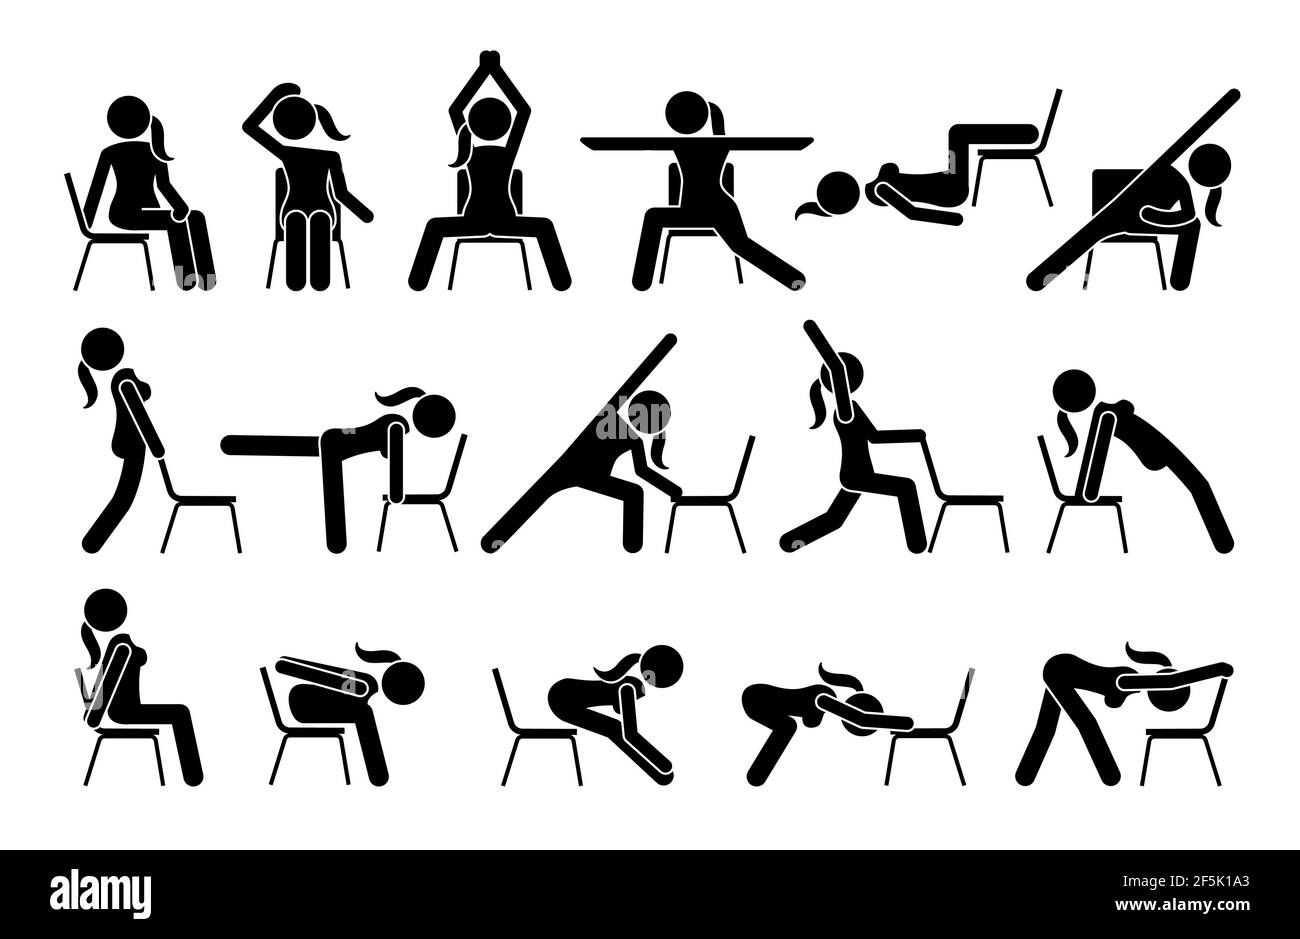 Chair yoga exercises stick figure pictogram icons. Vector illustrations of chair yoga postures, poses, and workout for beginners. Stock Vector